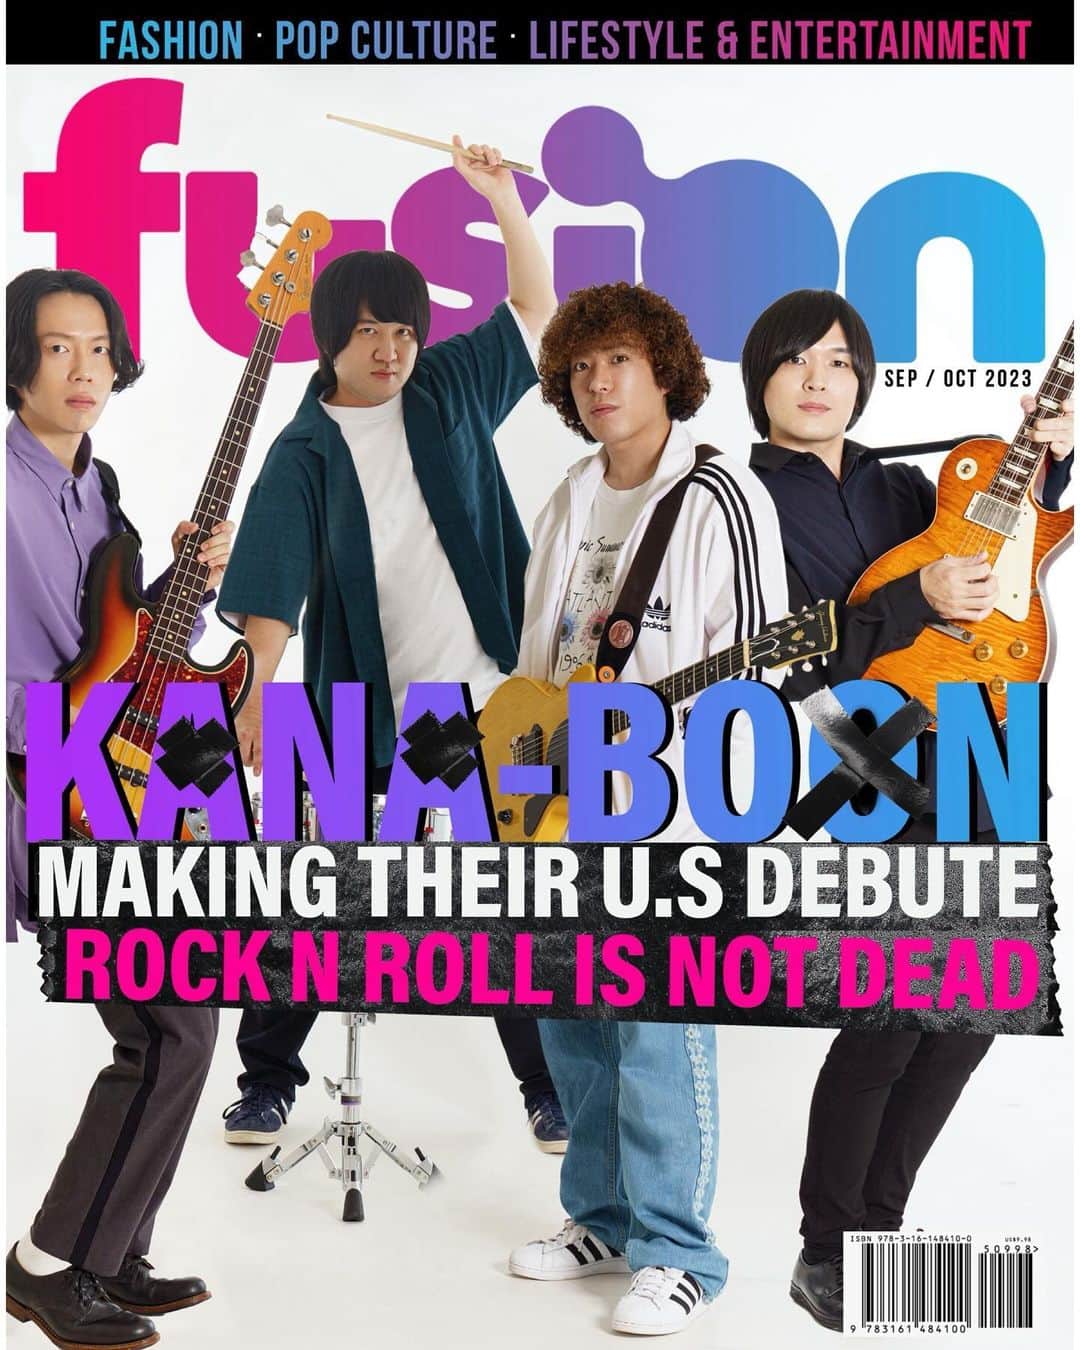 KANA-BOONのインスタグラム：「We are Proud to announced the next cover for fusion magazine we feature Kana-boon  and many viewers have anticipated  please stay tuned and please look forward to the exclusive interview on fusion magazine  Its released on Oct 18  ------------------ アメリカ時間の10/18(水)に発売となる、海外雑誌「Fusion」の表紙をKANA-BOONが務めさせていただきます！  メンバー全員でのインタビューが掲載されていますので、ぜひチェックしてください！ #kanaboon #kanaboonsilhouette  #music #rock #alternative #fusion #magazine」